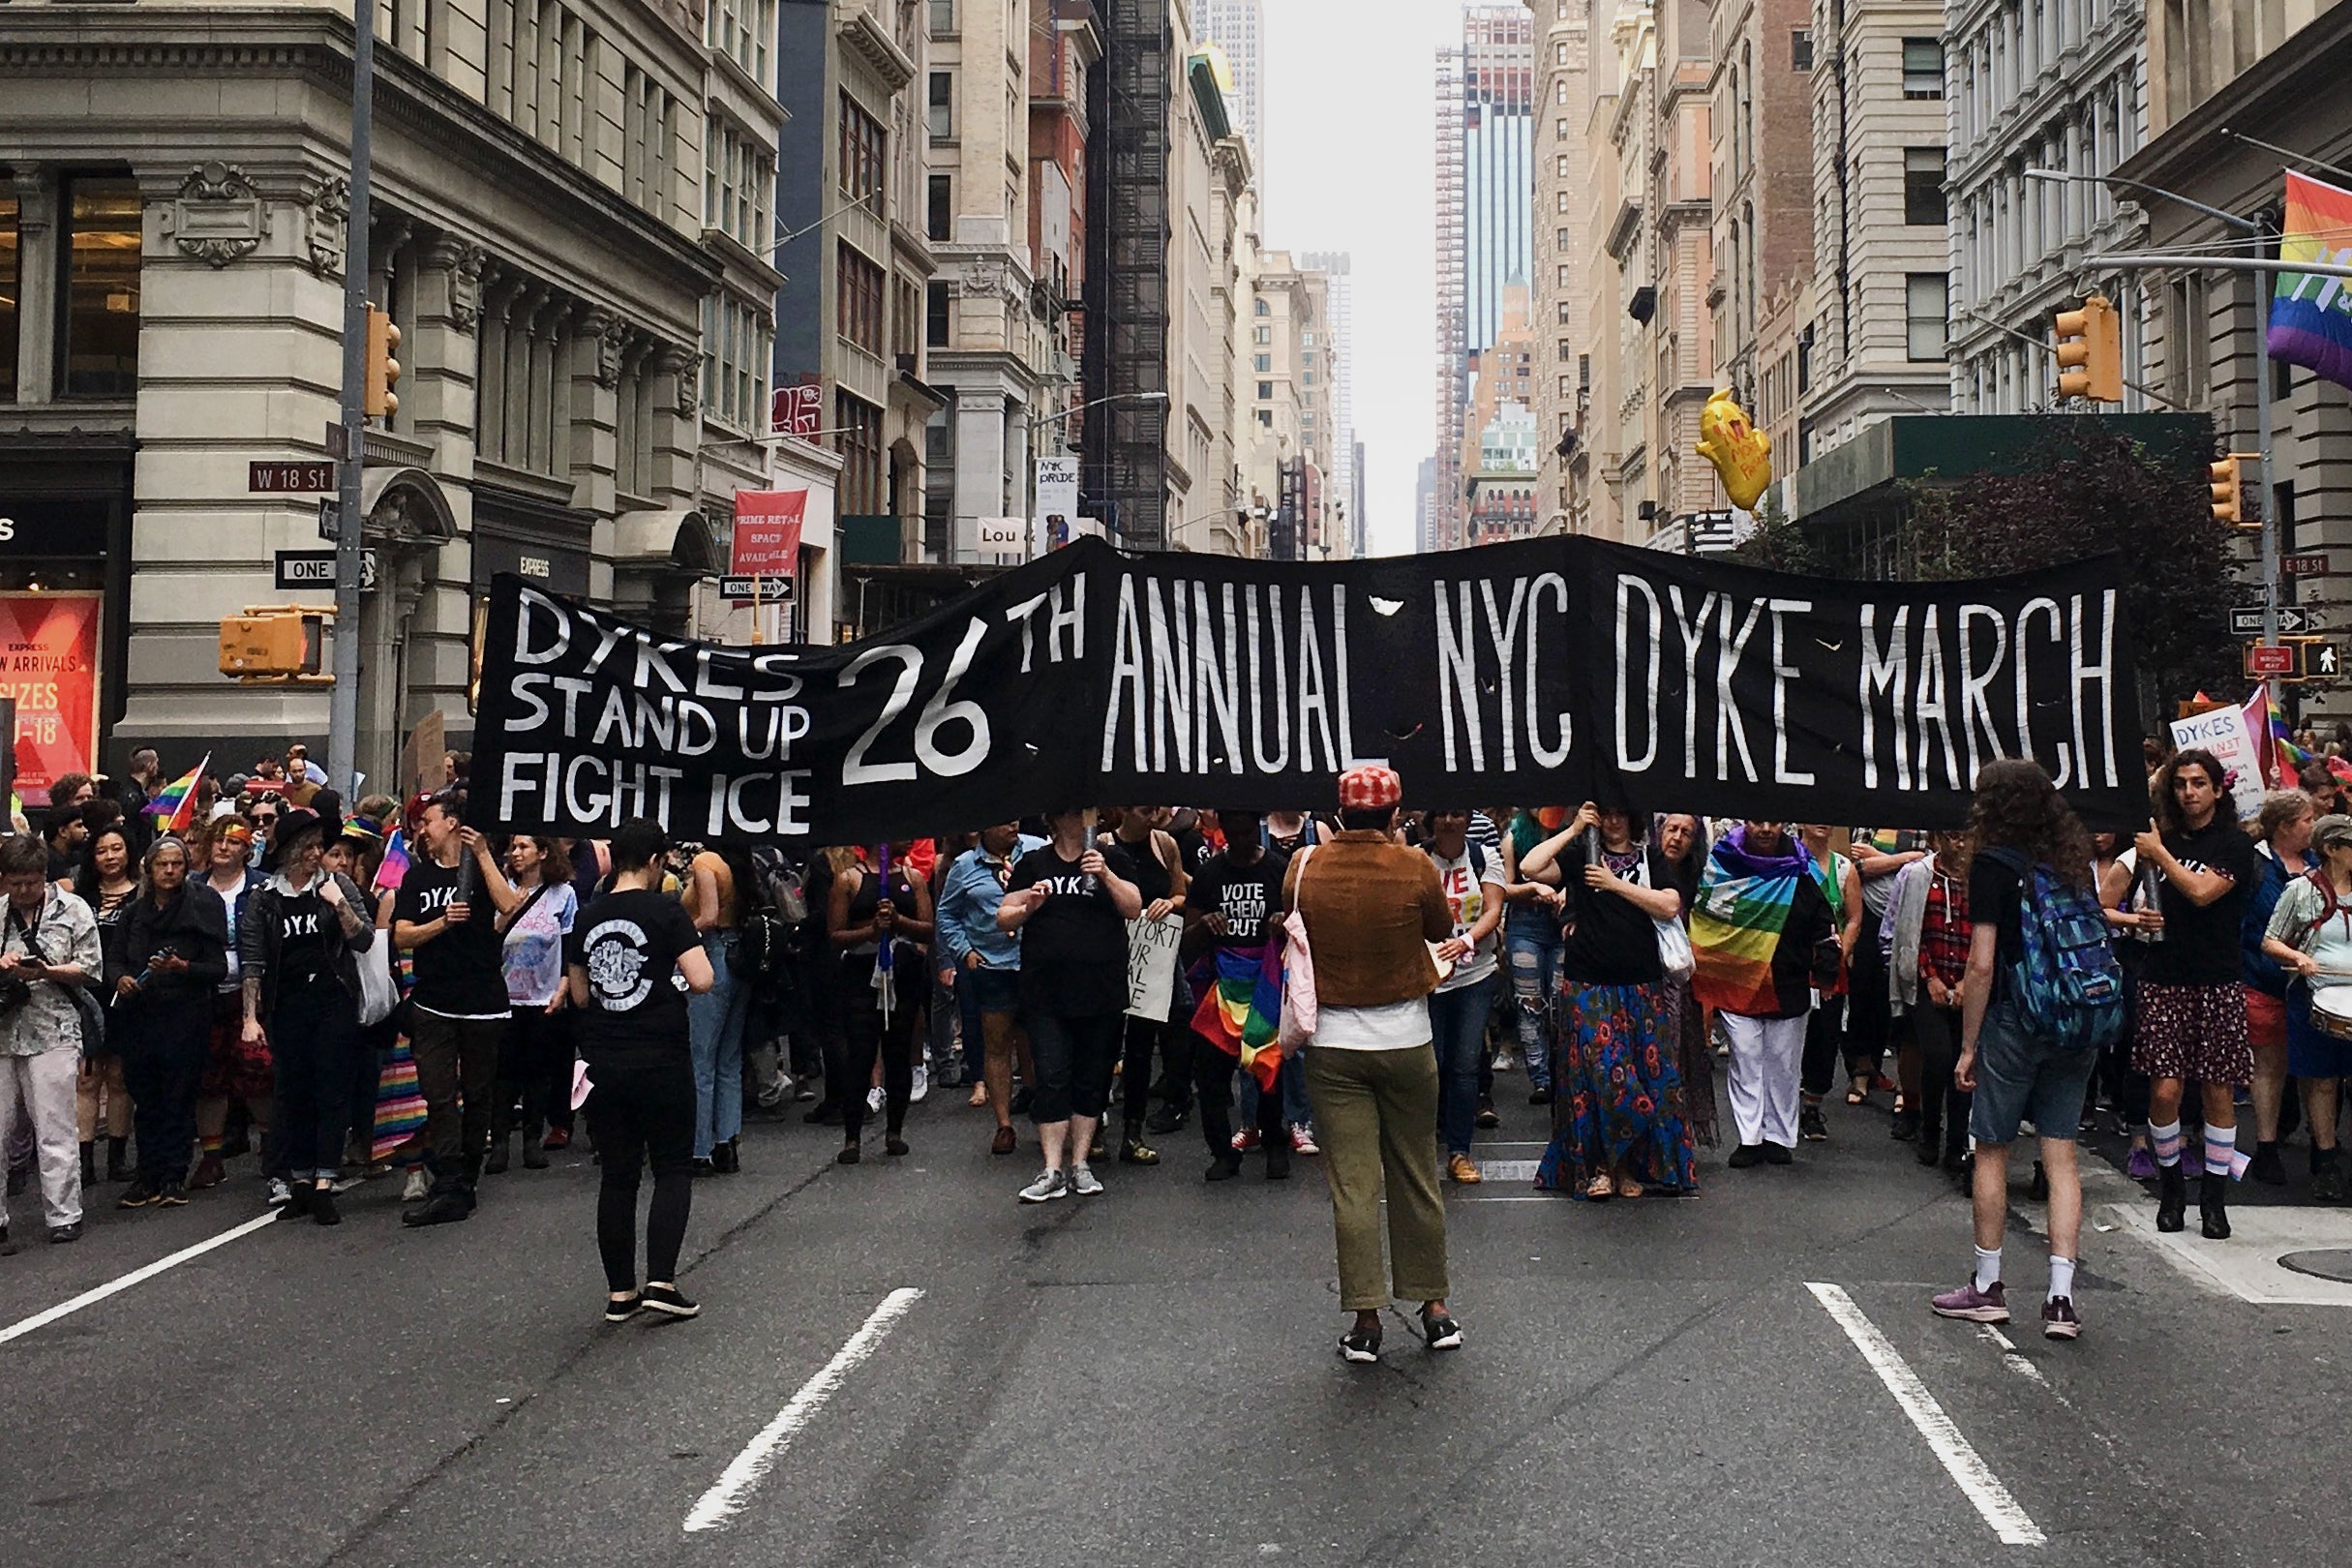 A view of the NYC Dyke March with a banner in the foreground.